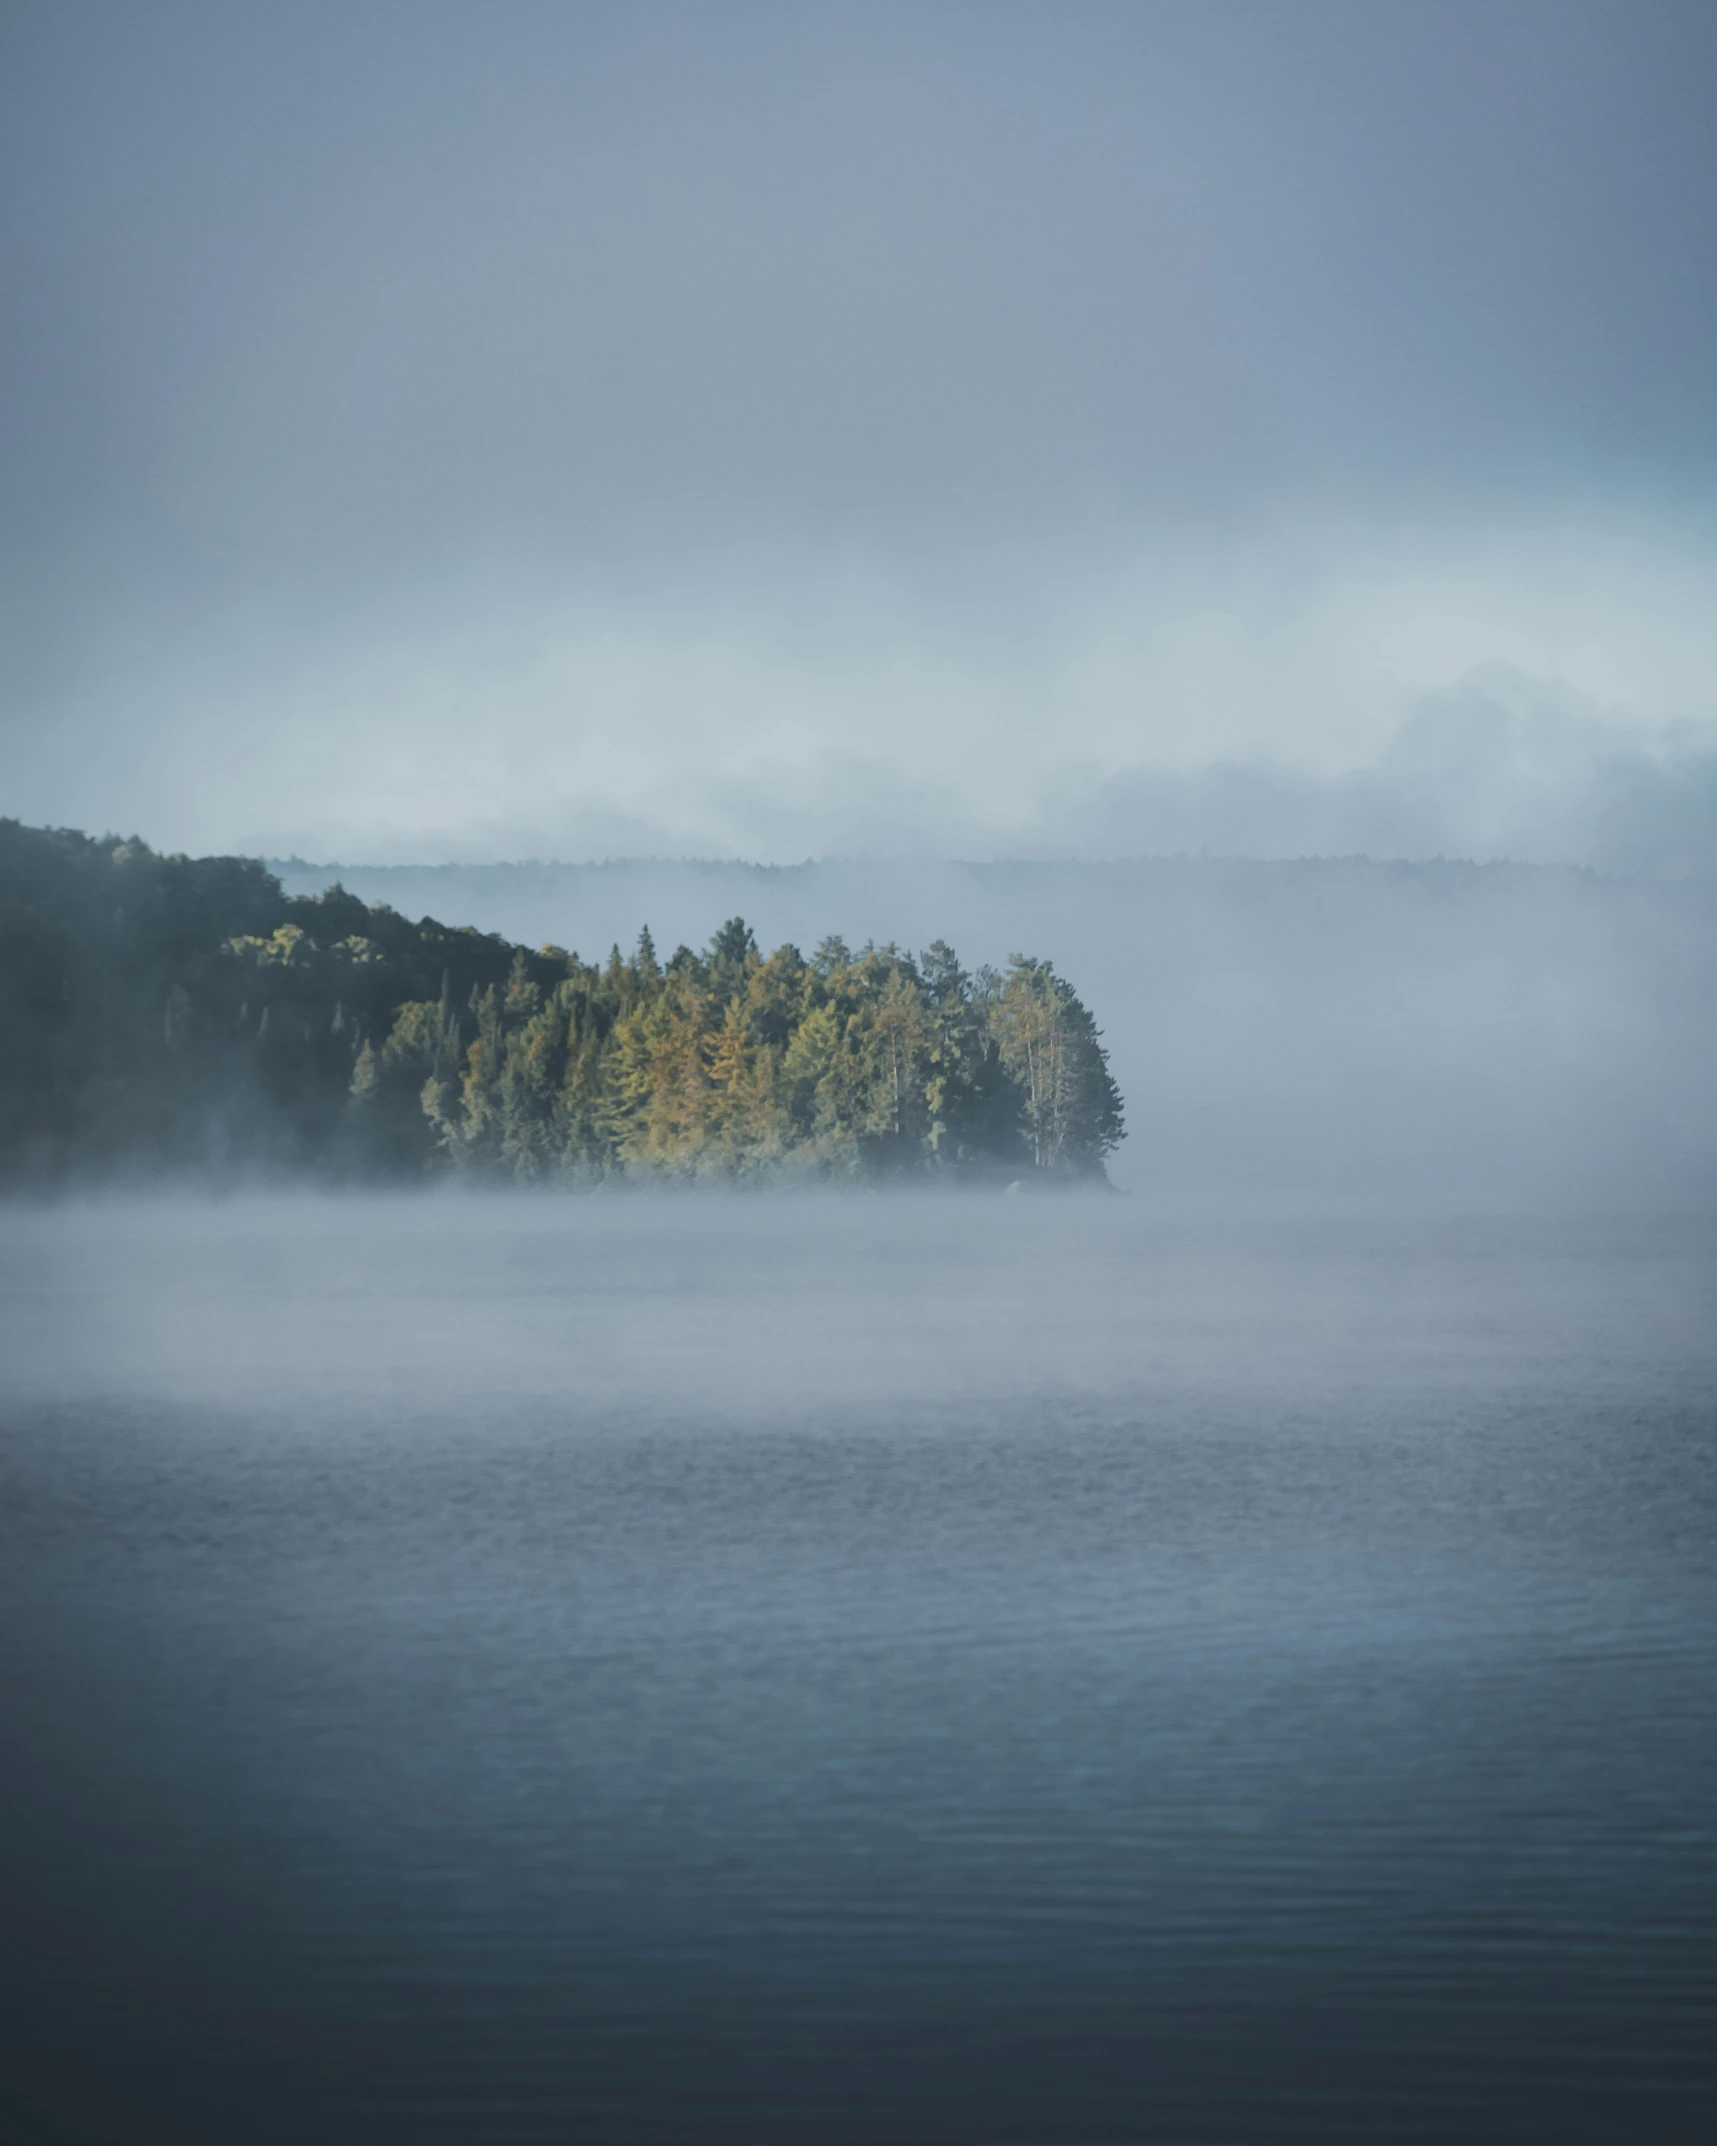 a row of evergreen trees sit on a foggy lake